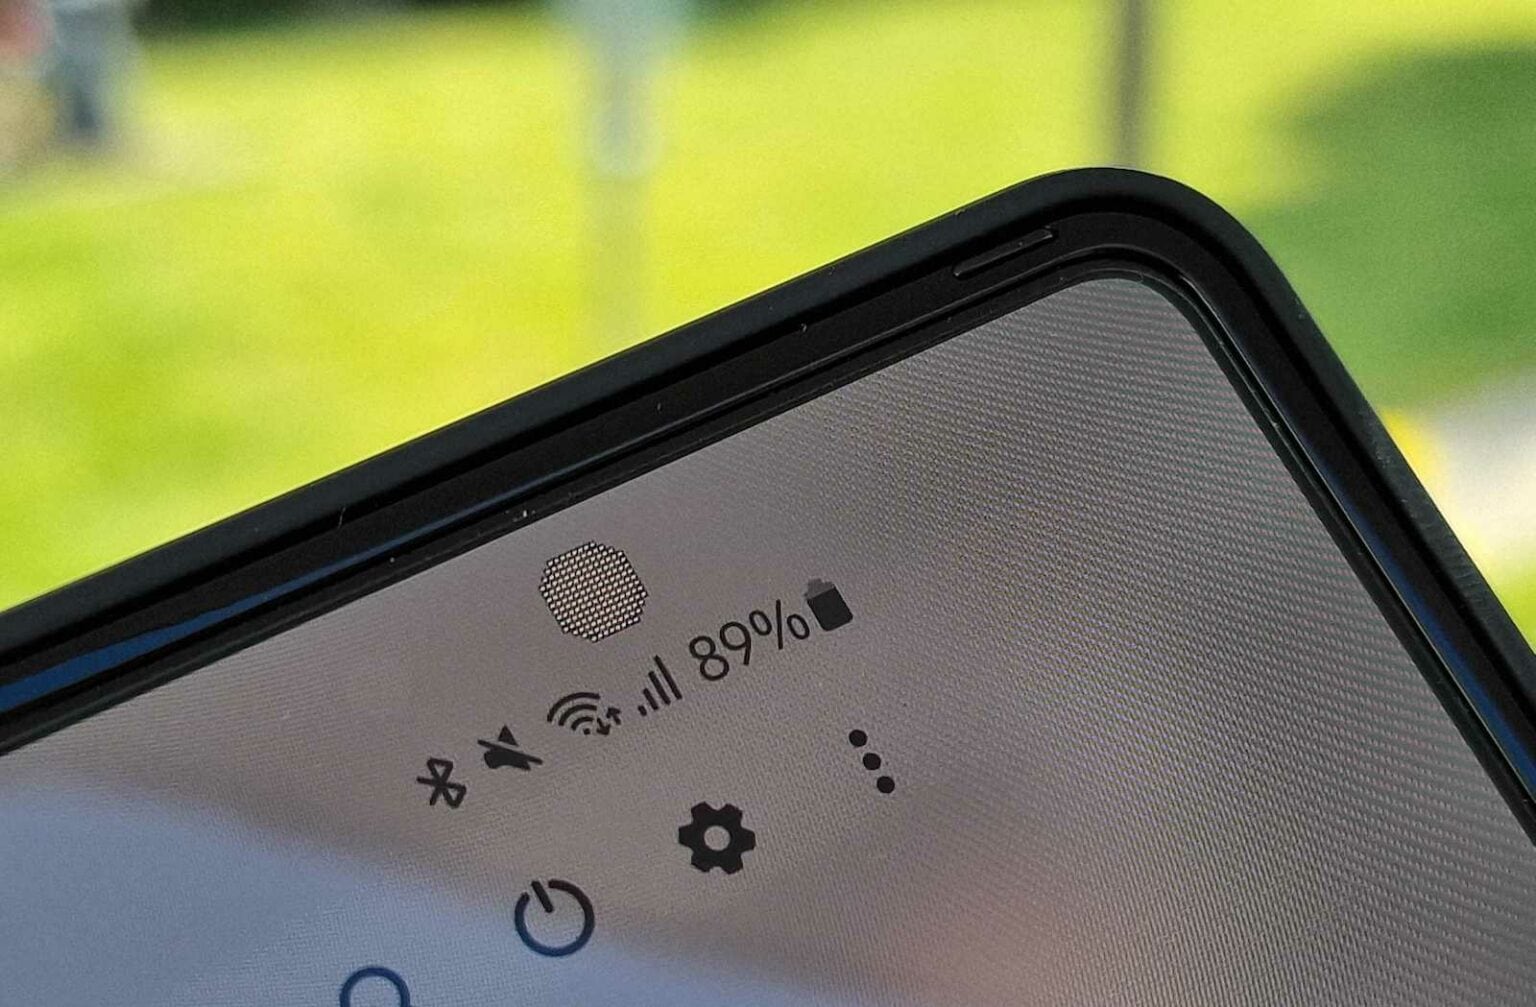 iPhone 15 Pro could have hidden Face ID sensors